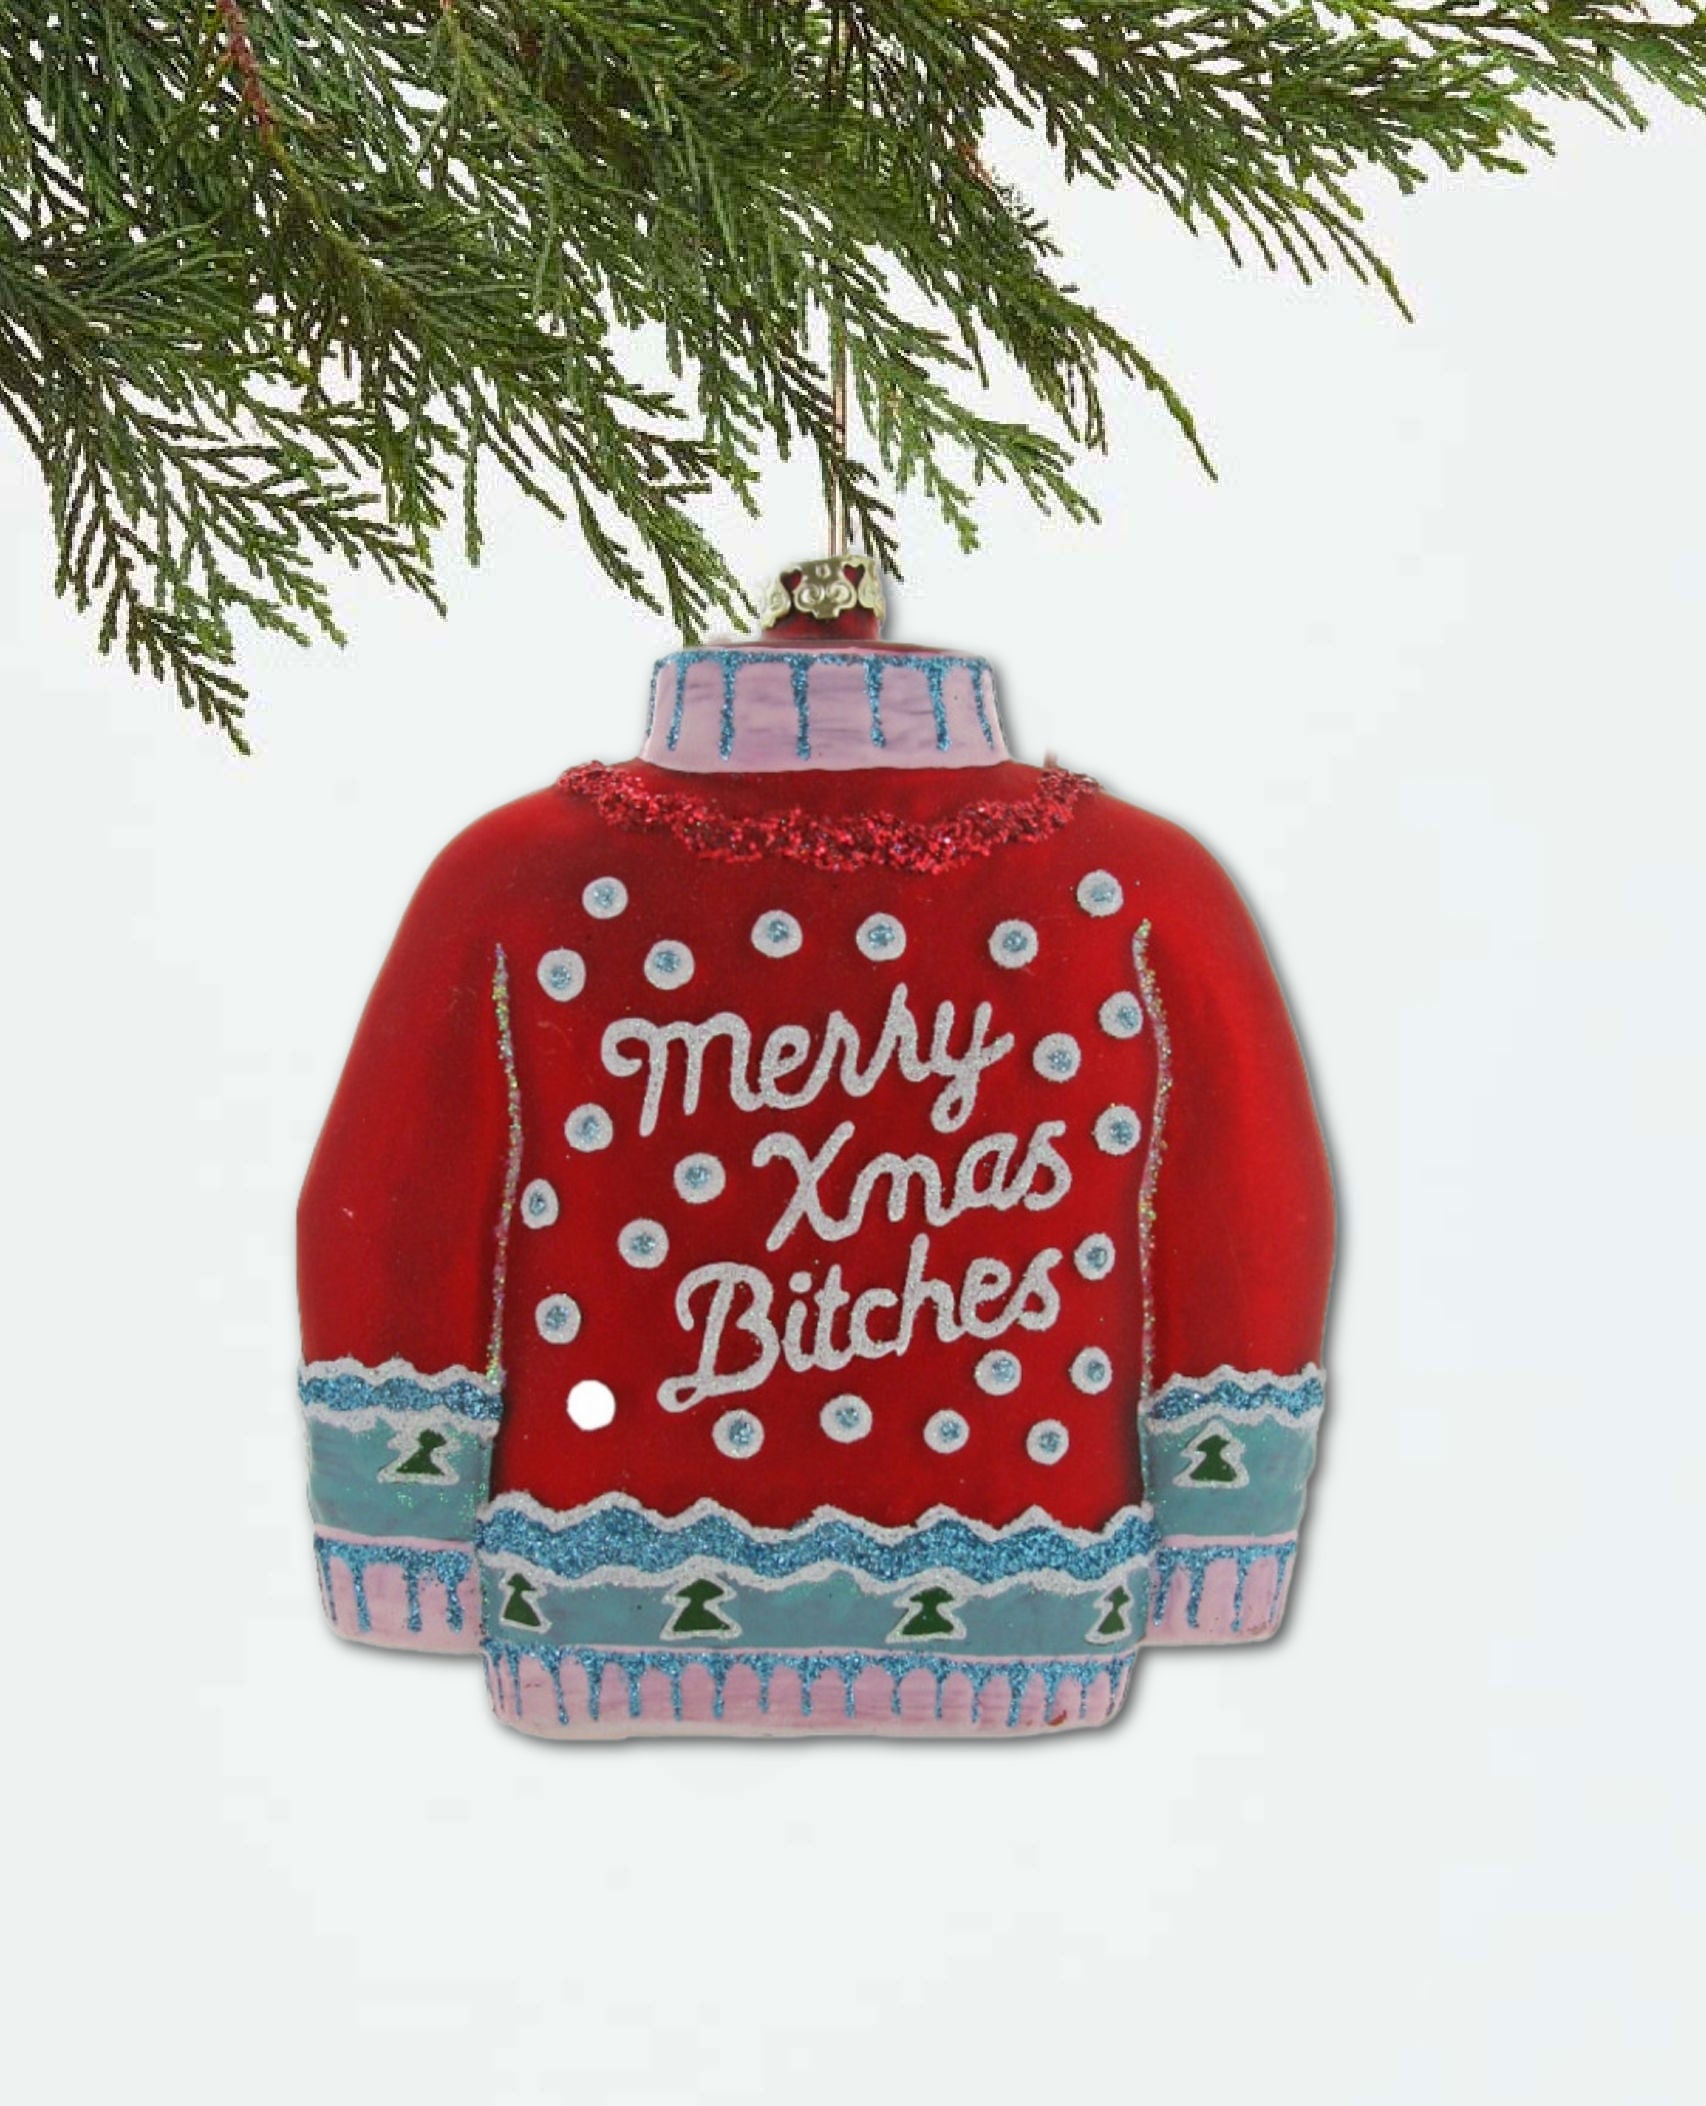 Merry Christmas B*tches Red Ornament